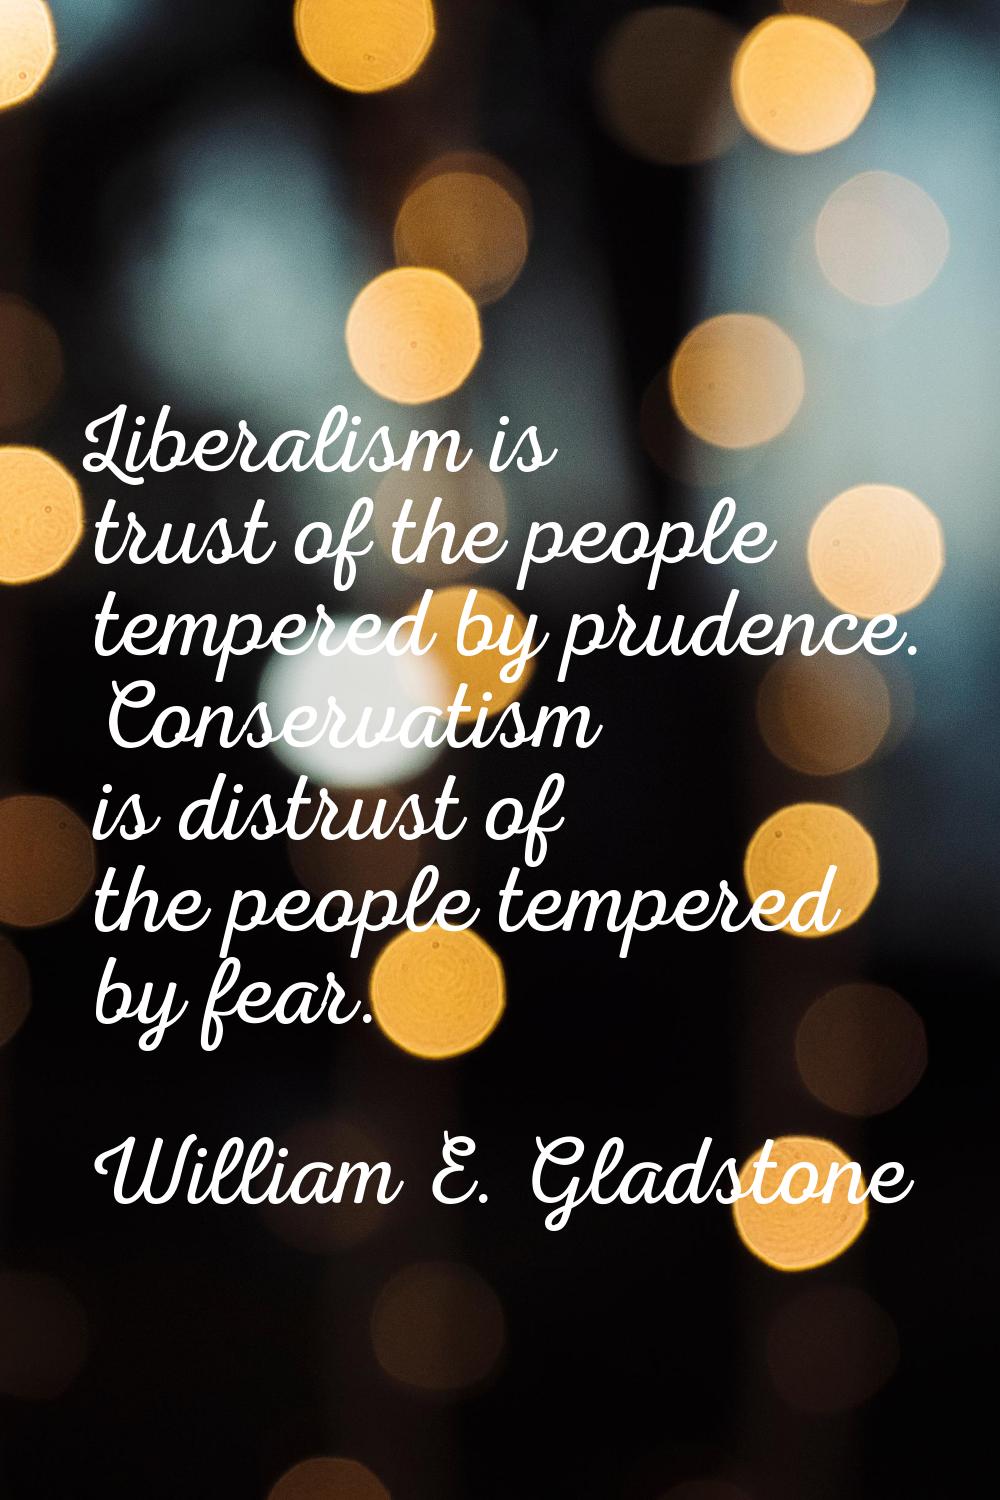 Liberalism is trust of the people tempered by prudence. Conservatism is distrust of the people temp